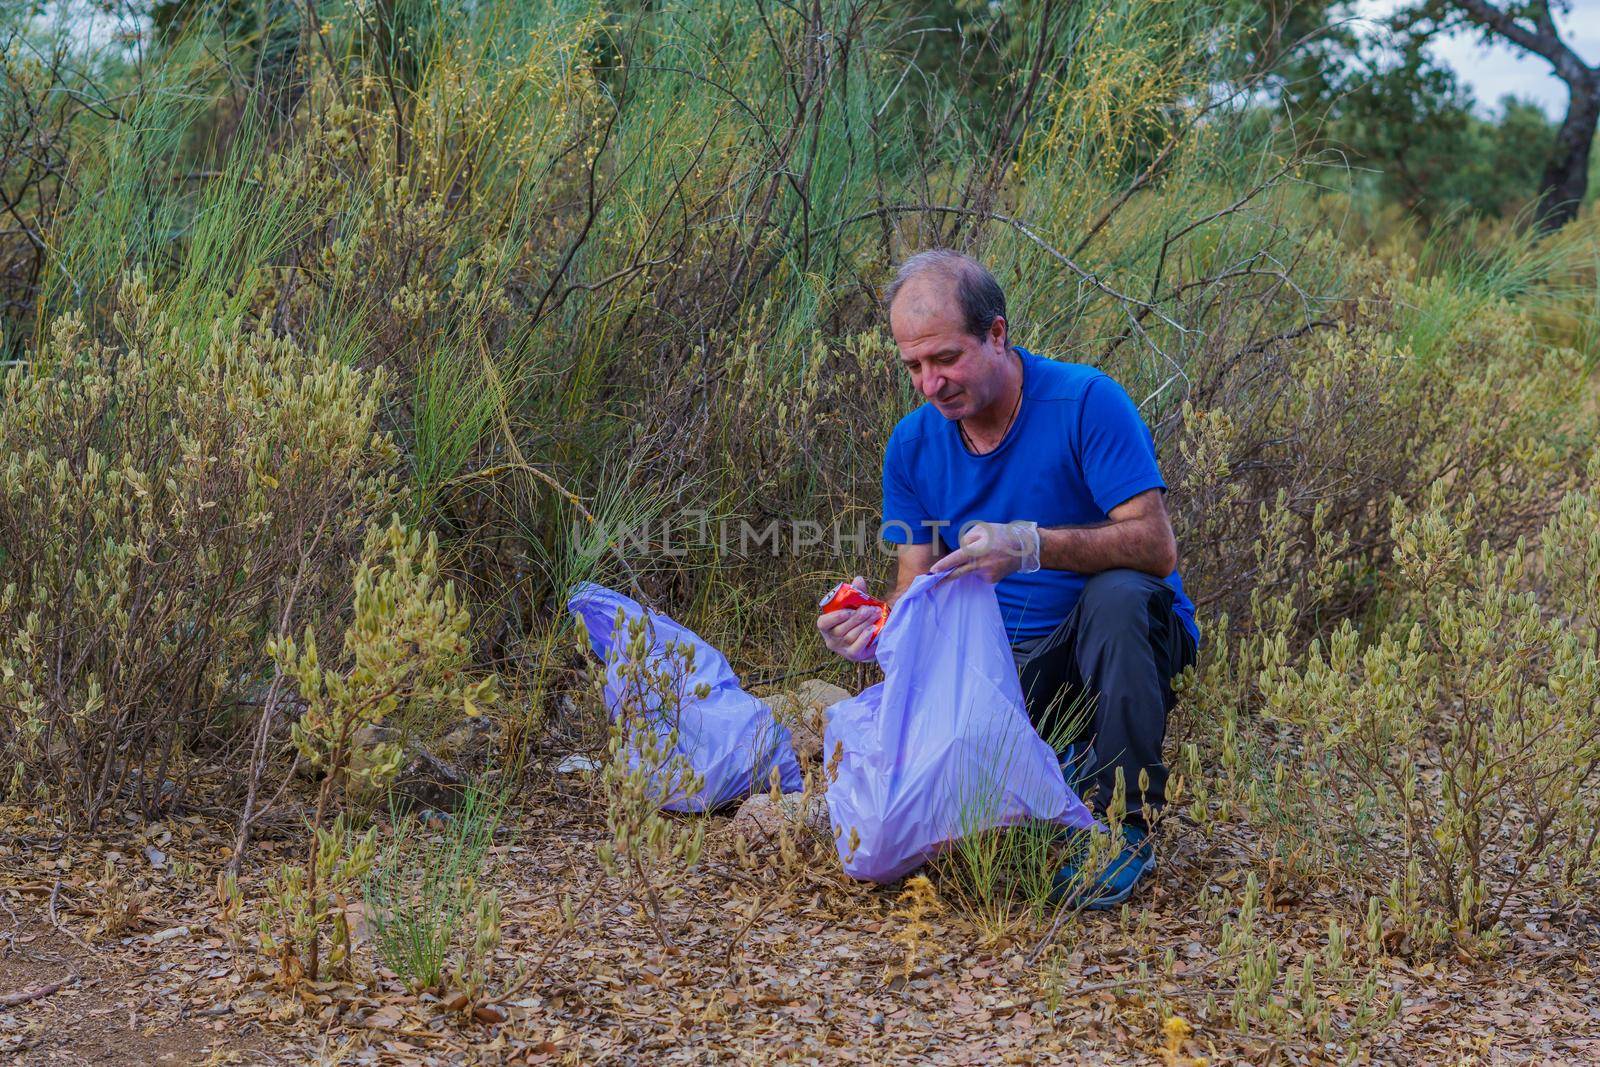 environmentalist man with garbage bags picking up garbage from the field and taking care of the environment